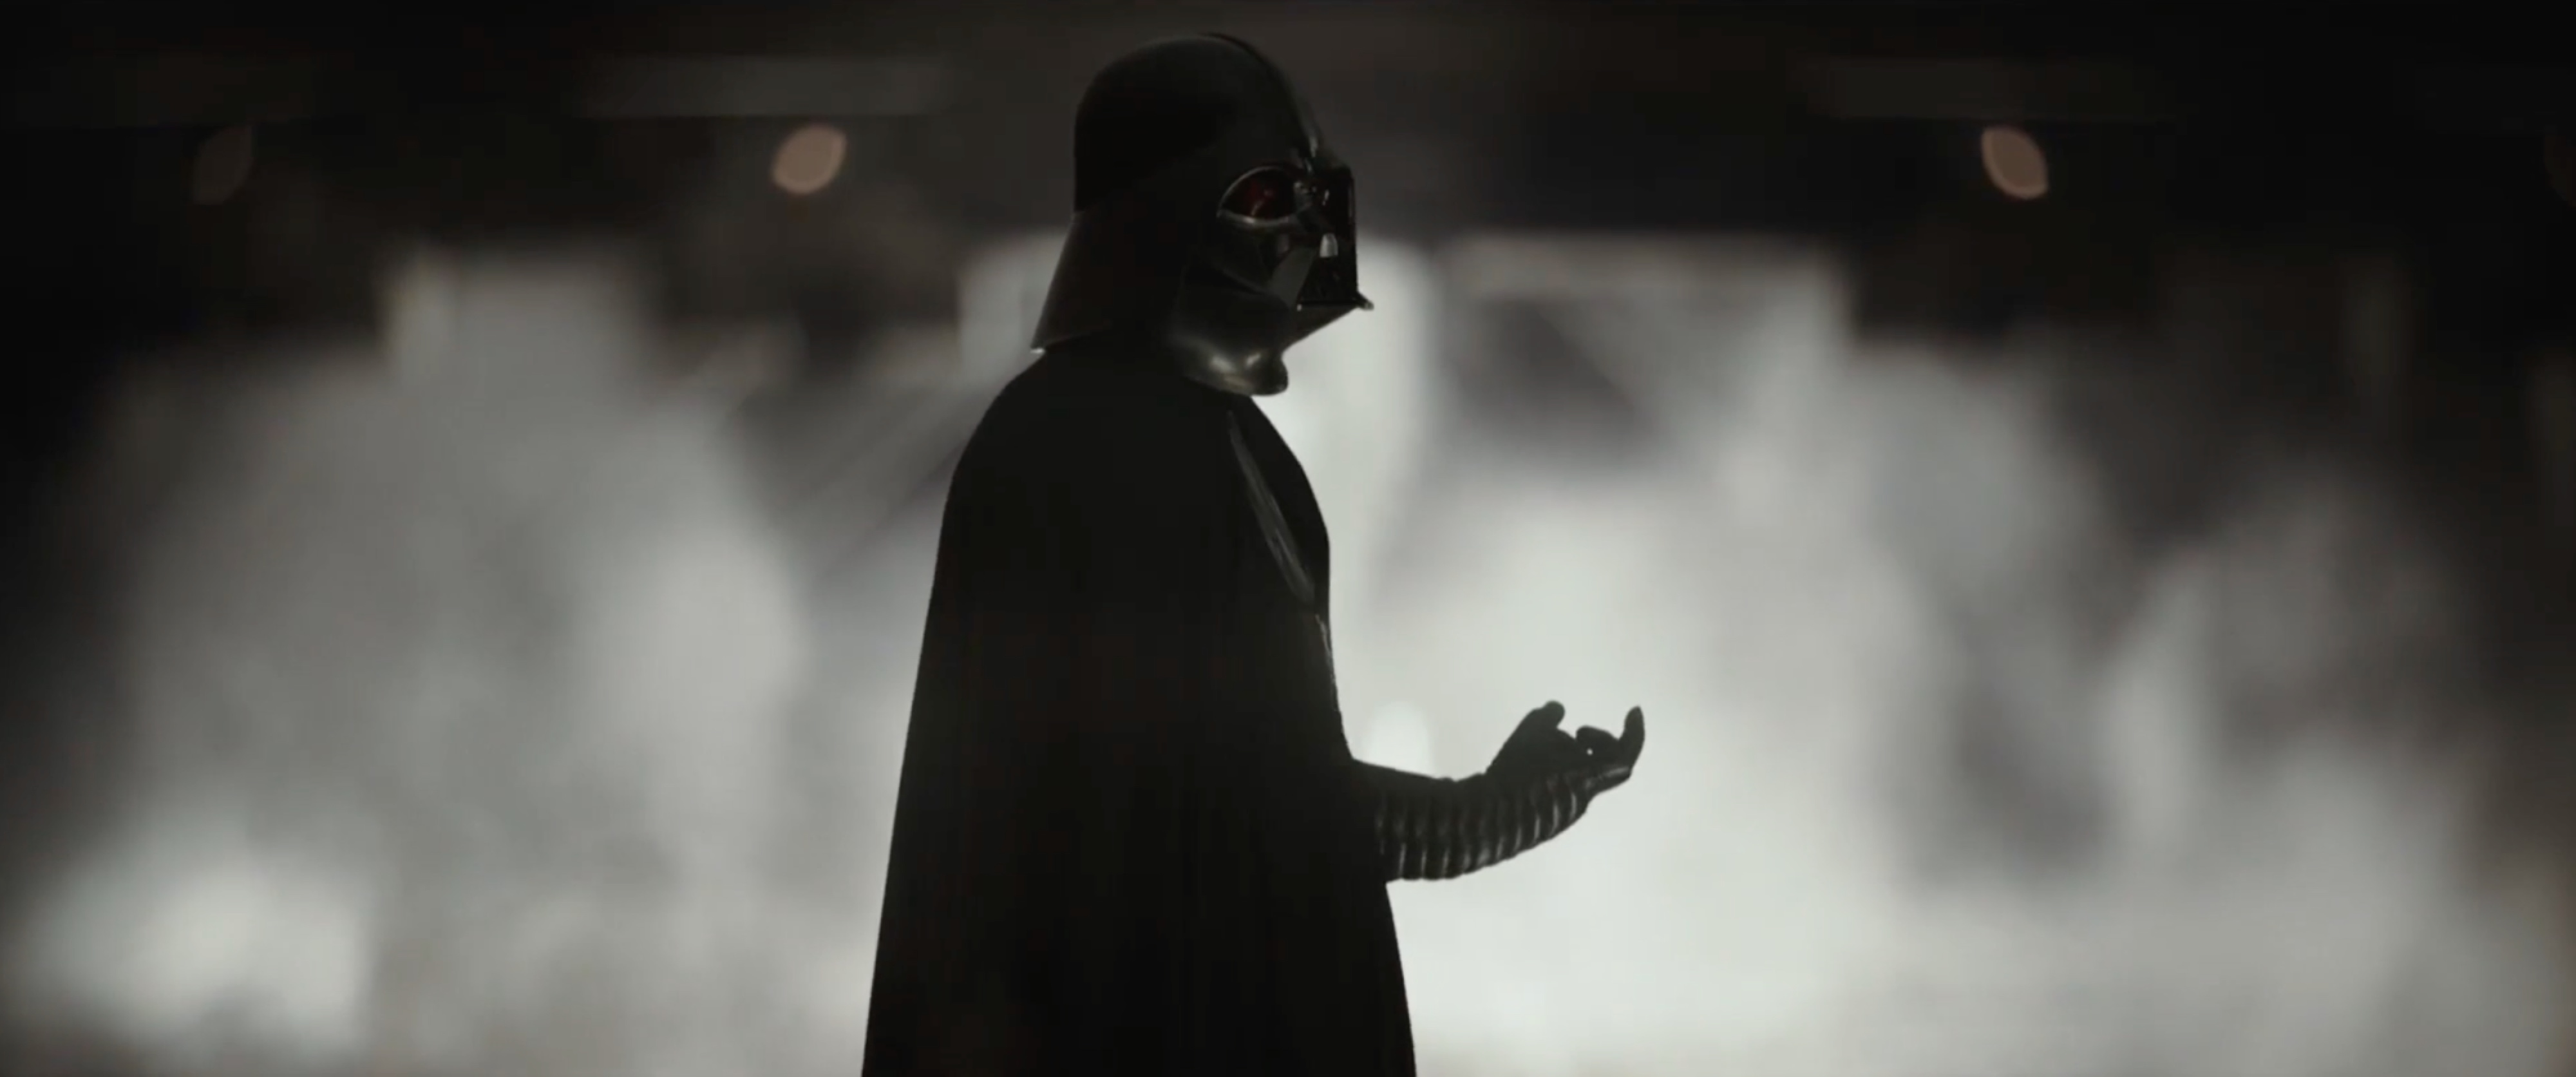 Does anybody have a wallpaper image of Darth Vader Rogue One standing in  the hallway with his lightsaber in 4K  rStarWars